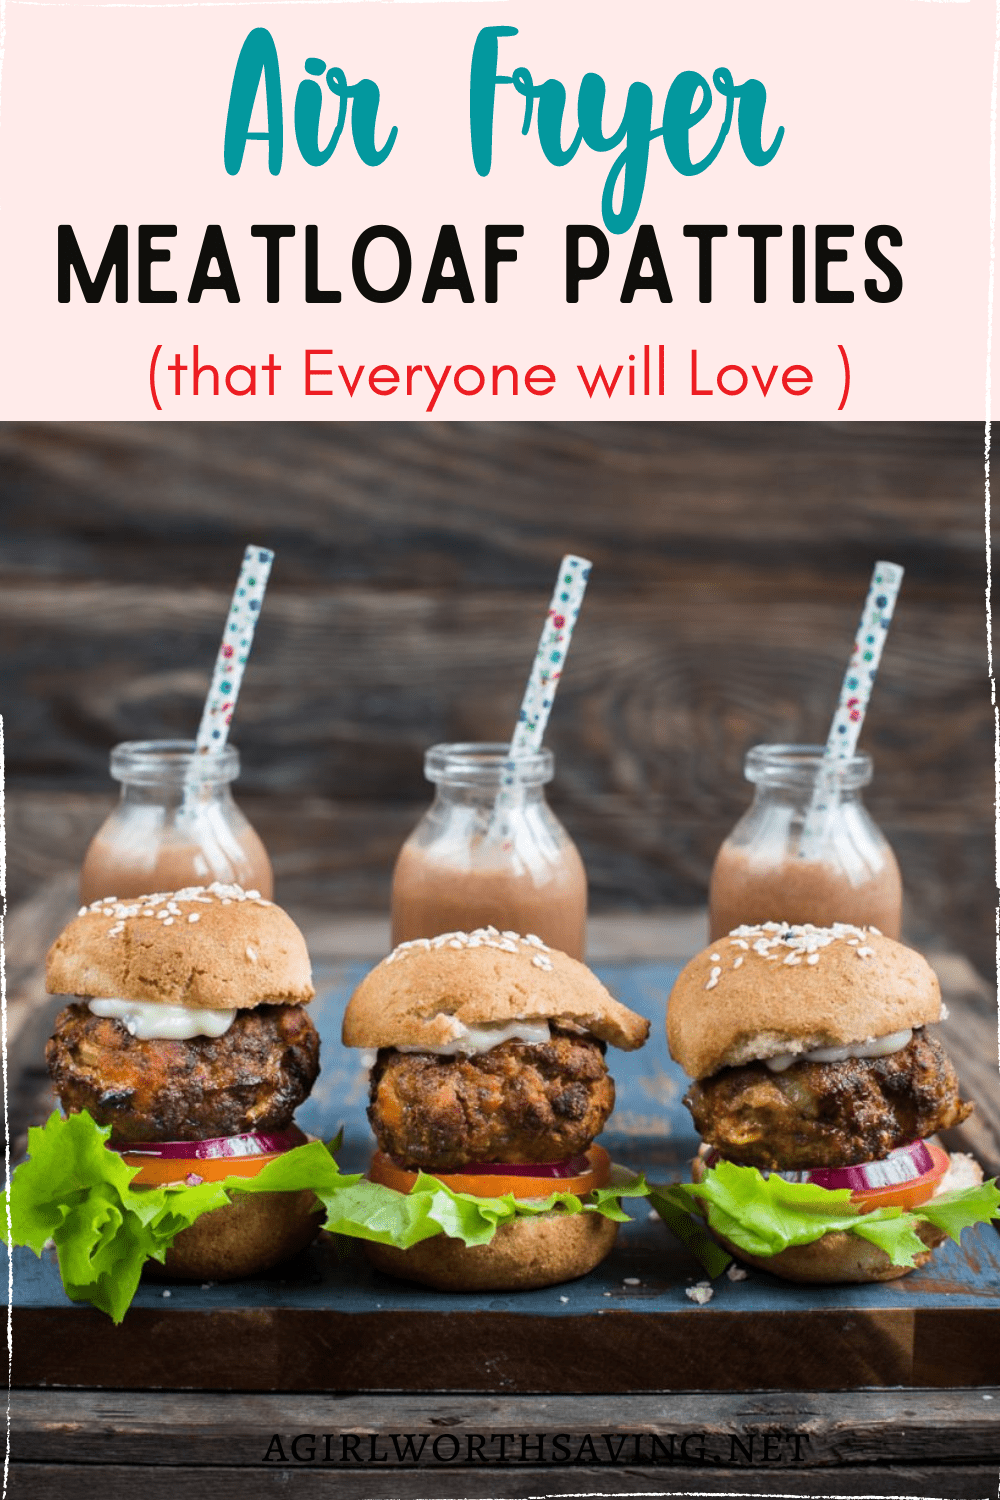 If you're looking for a great meatloaf recipe, this Air Fryer Meatloaf recipe is perfect. Not only are the ingredients simple and easy to use but the flavor is truly unlike anything you've tried. This is one of my top comfort food dishes that I can't wait to share these delicious air fryer meatloaf patties with all of you.